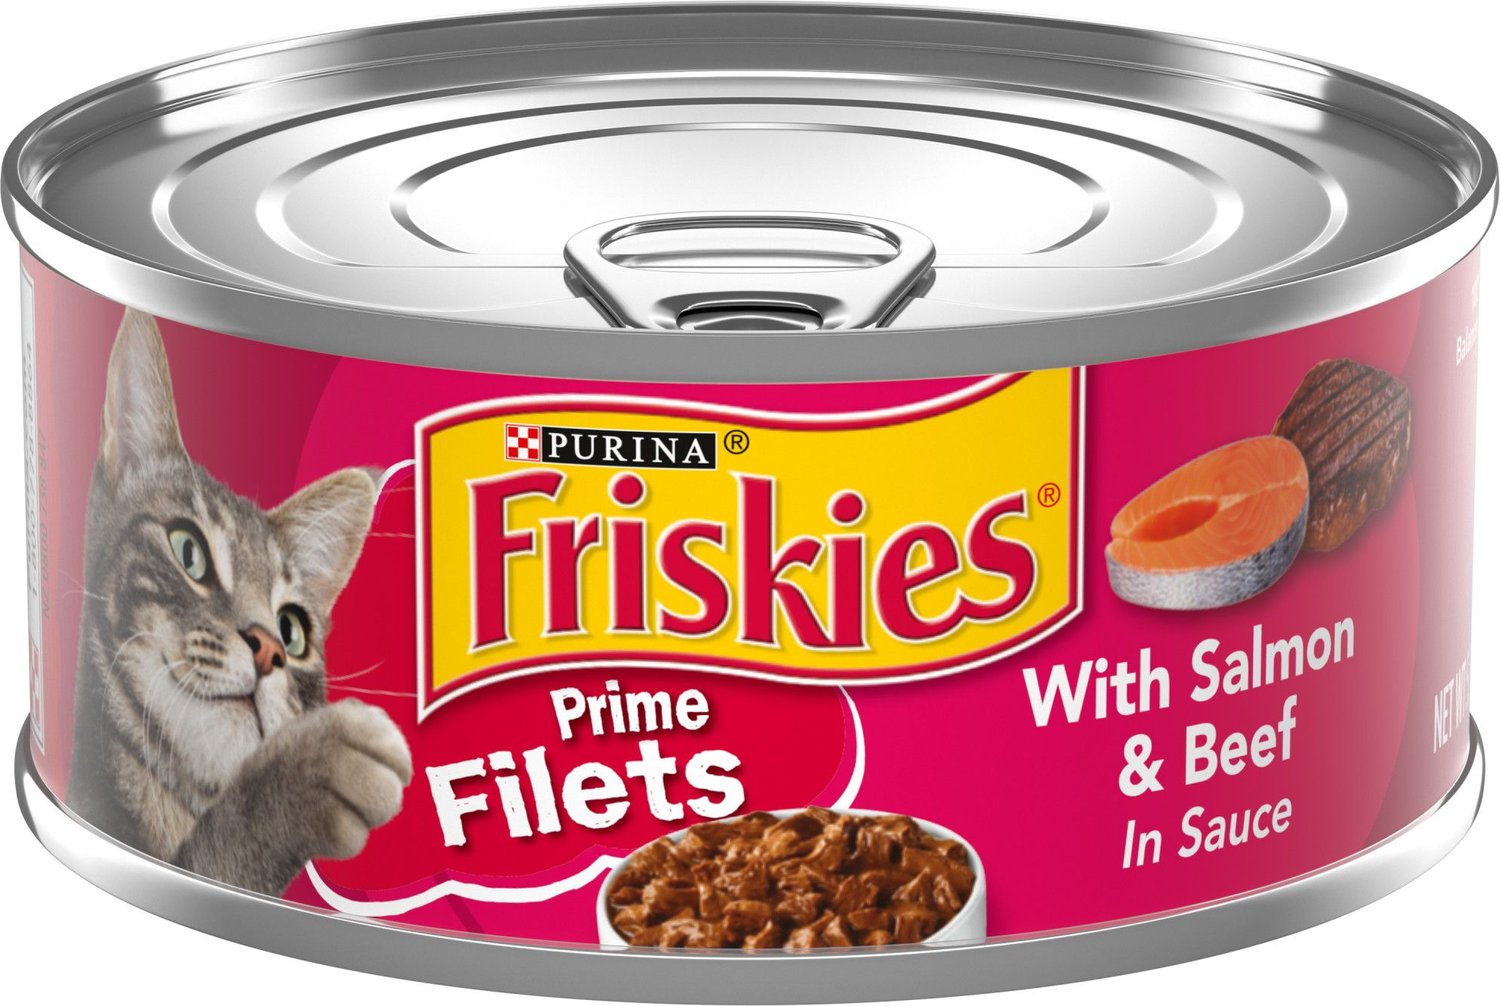 Is Friskies Cat Food Bad For Dogs